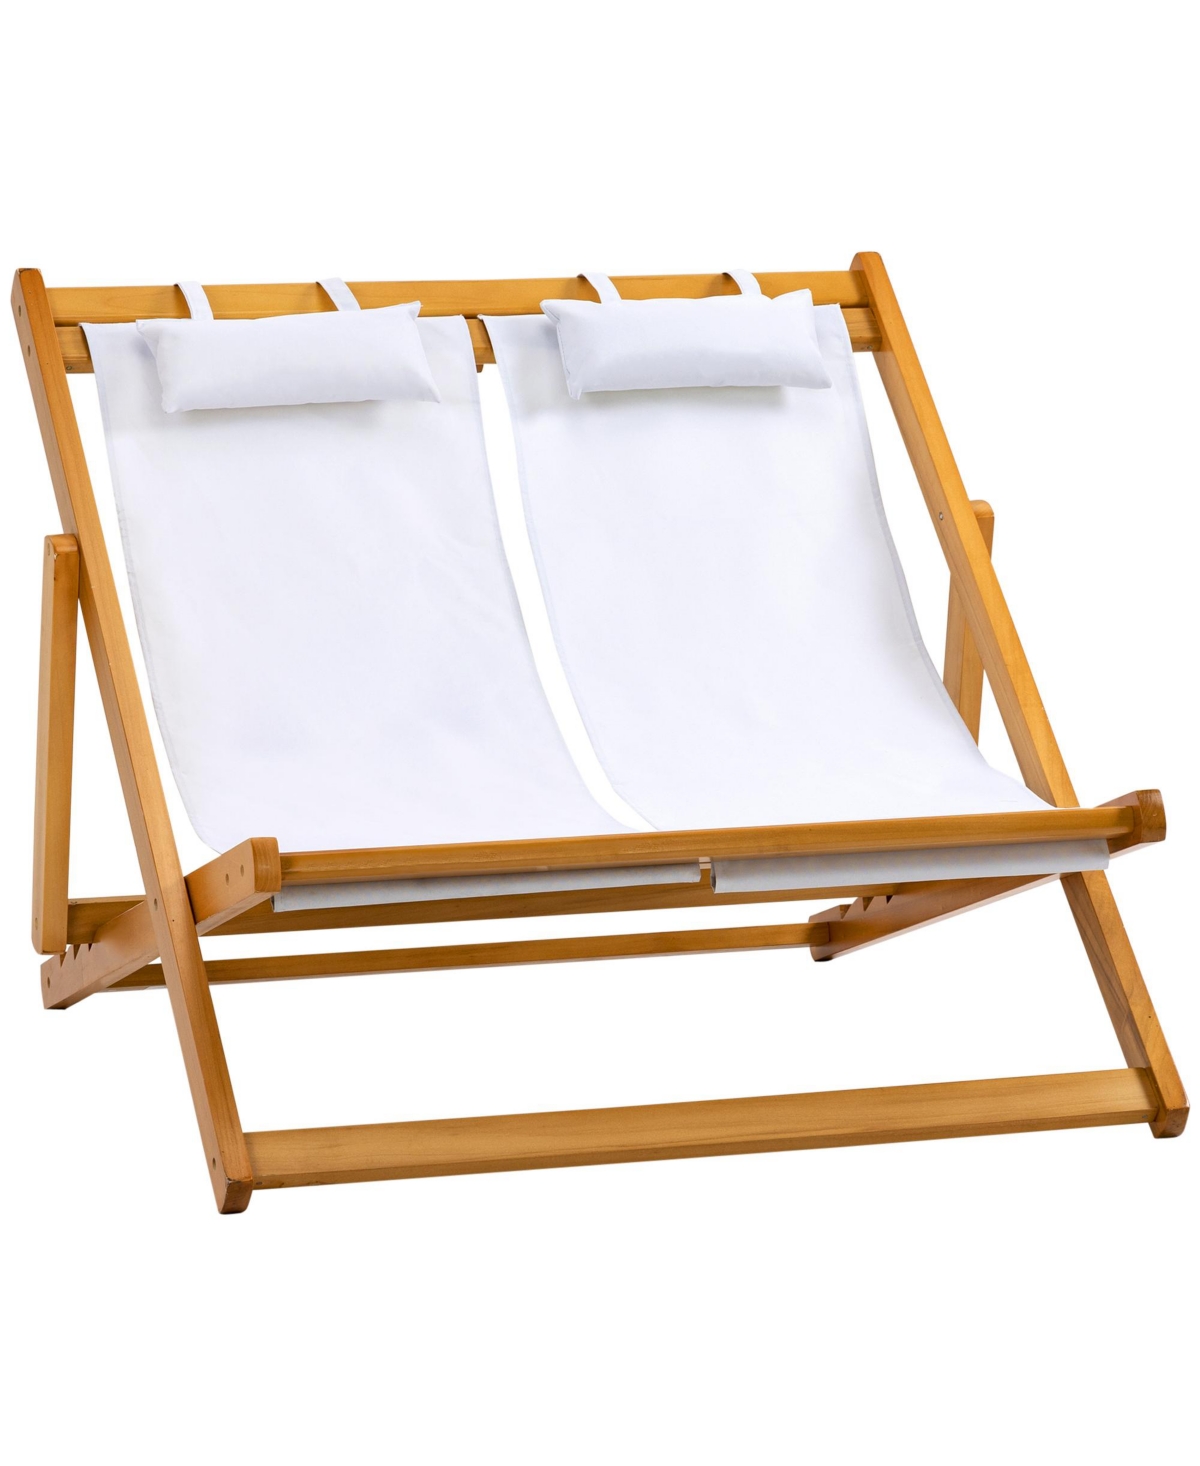 Outsunny 2-person Double Patio Chaise Lounge Chair, Reclining Lounger, Folding Beach Chair With Adjustable Ba In Cream White